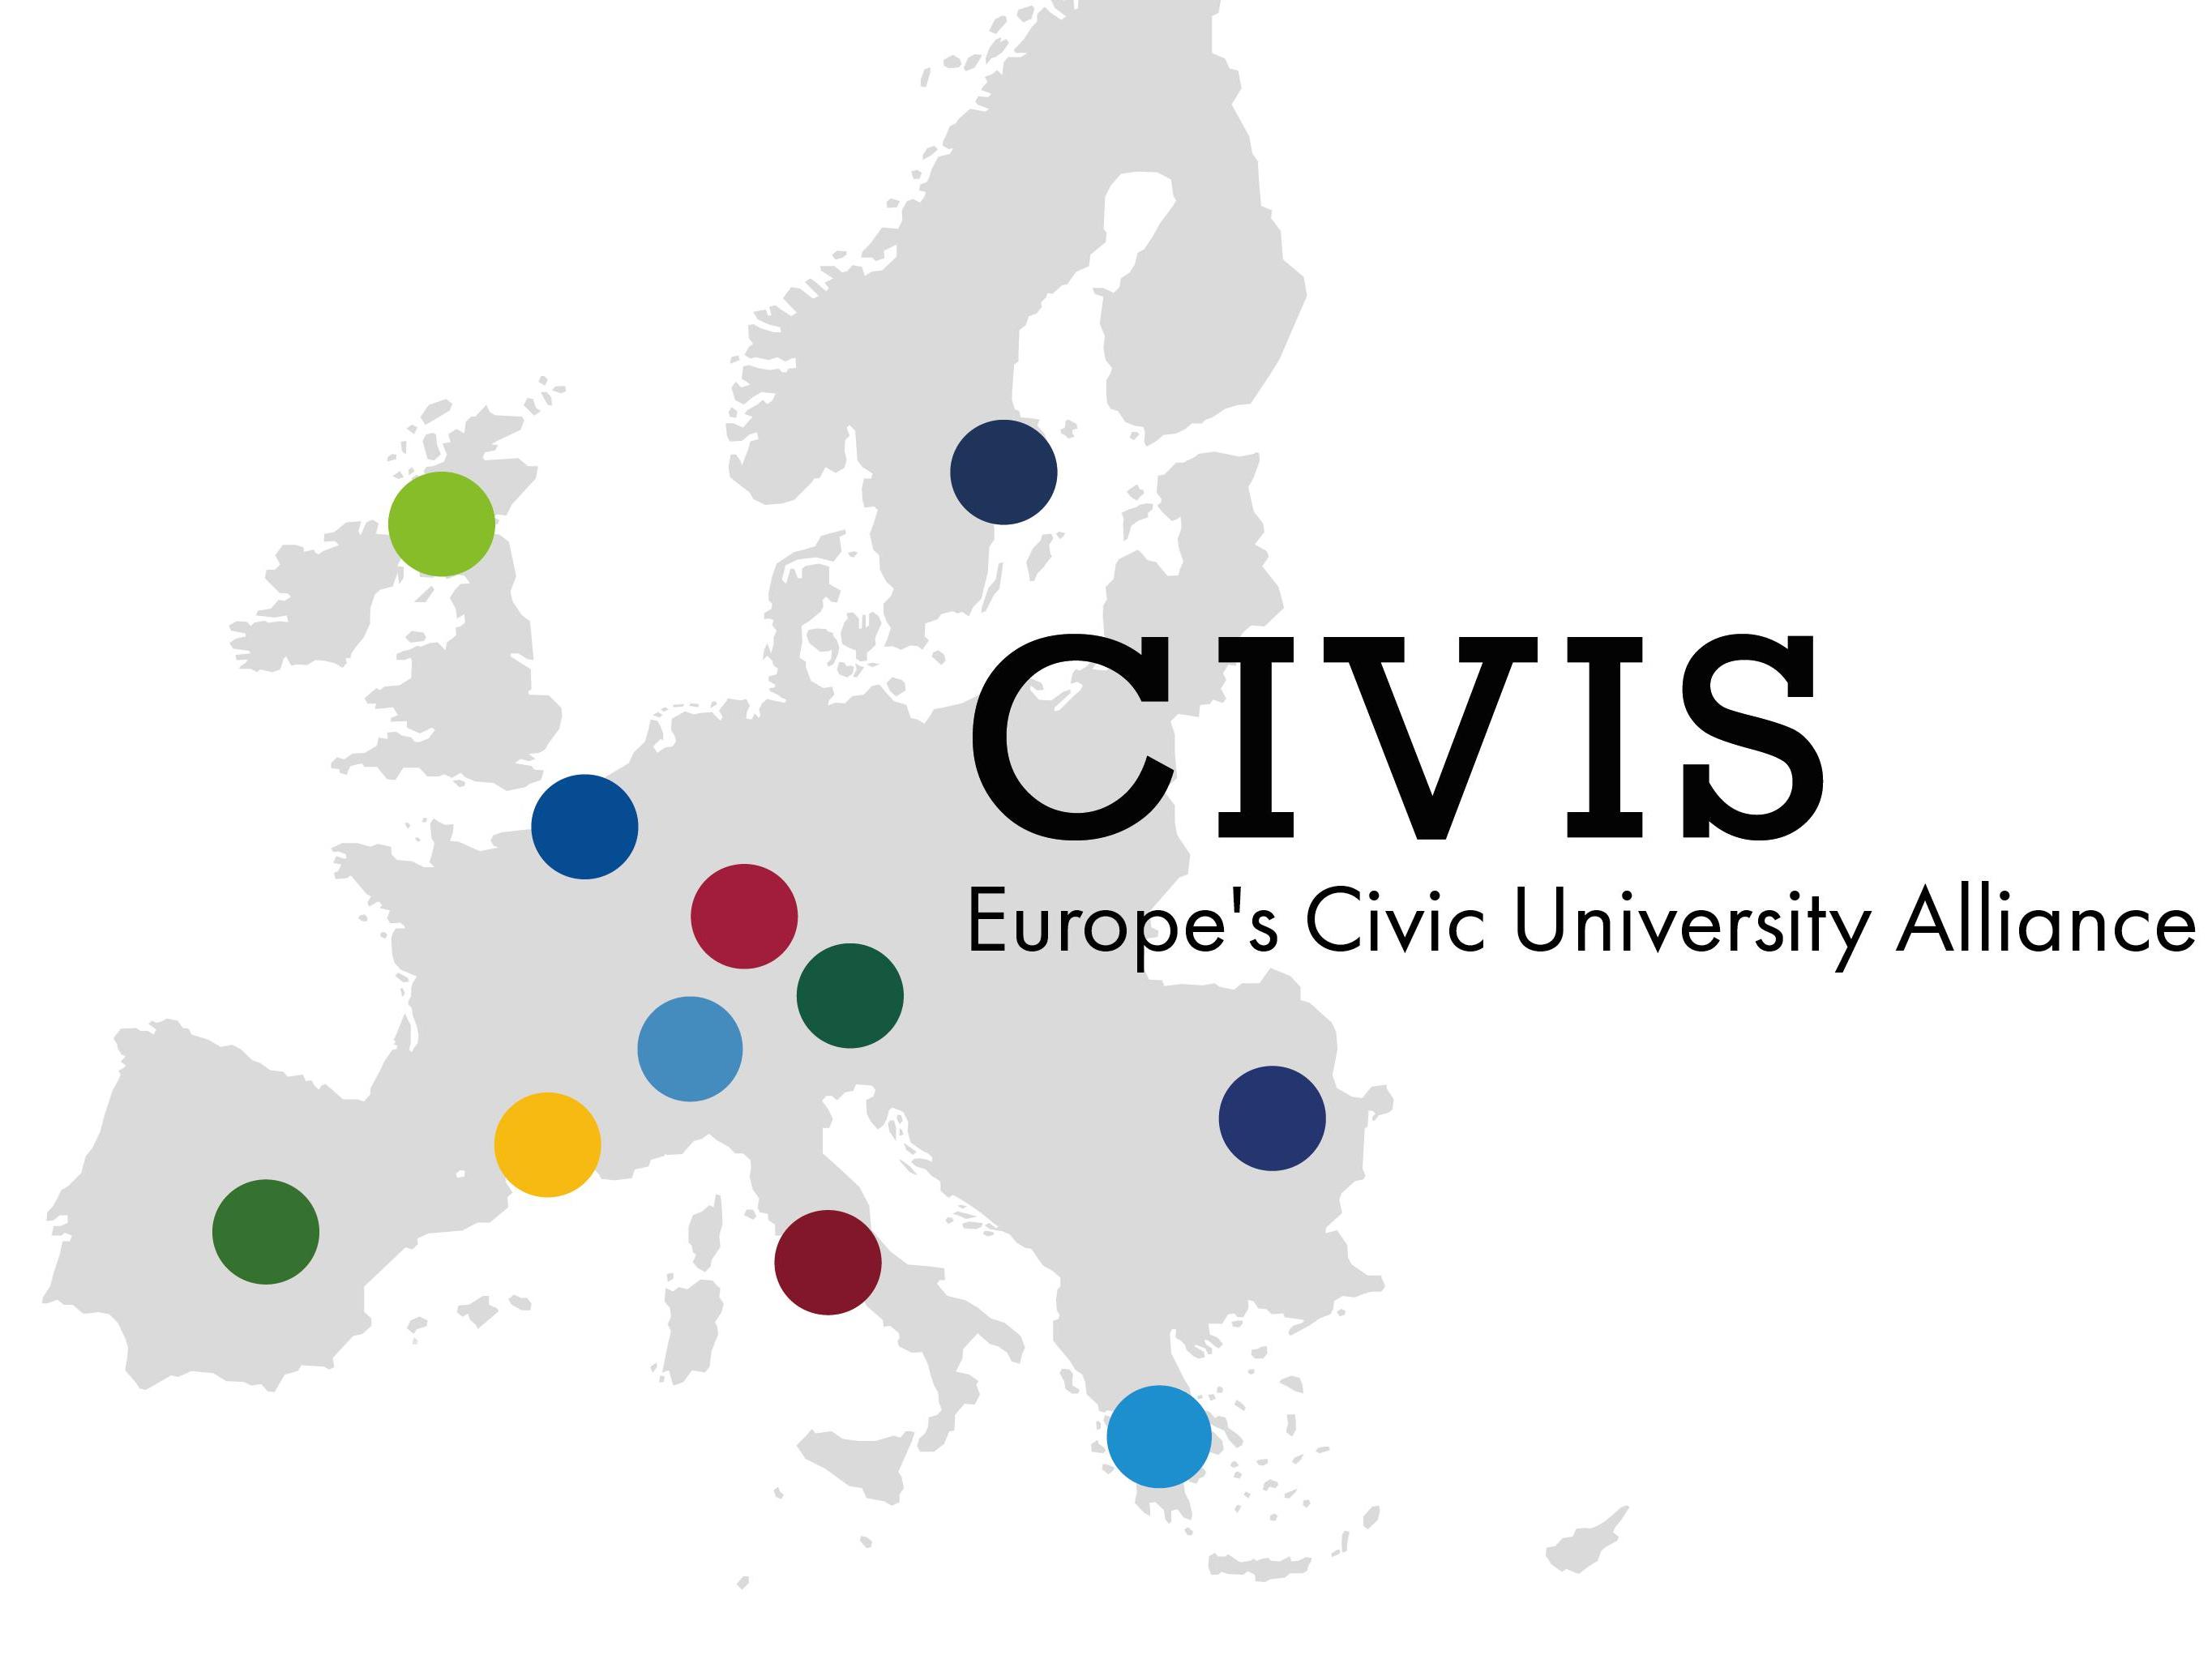 Résultat du call seed funding for networking CIVIS-UNIL  